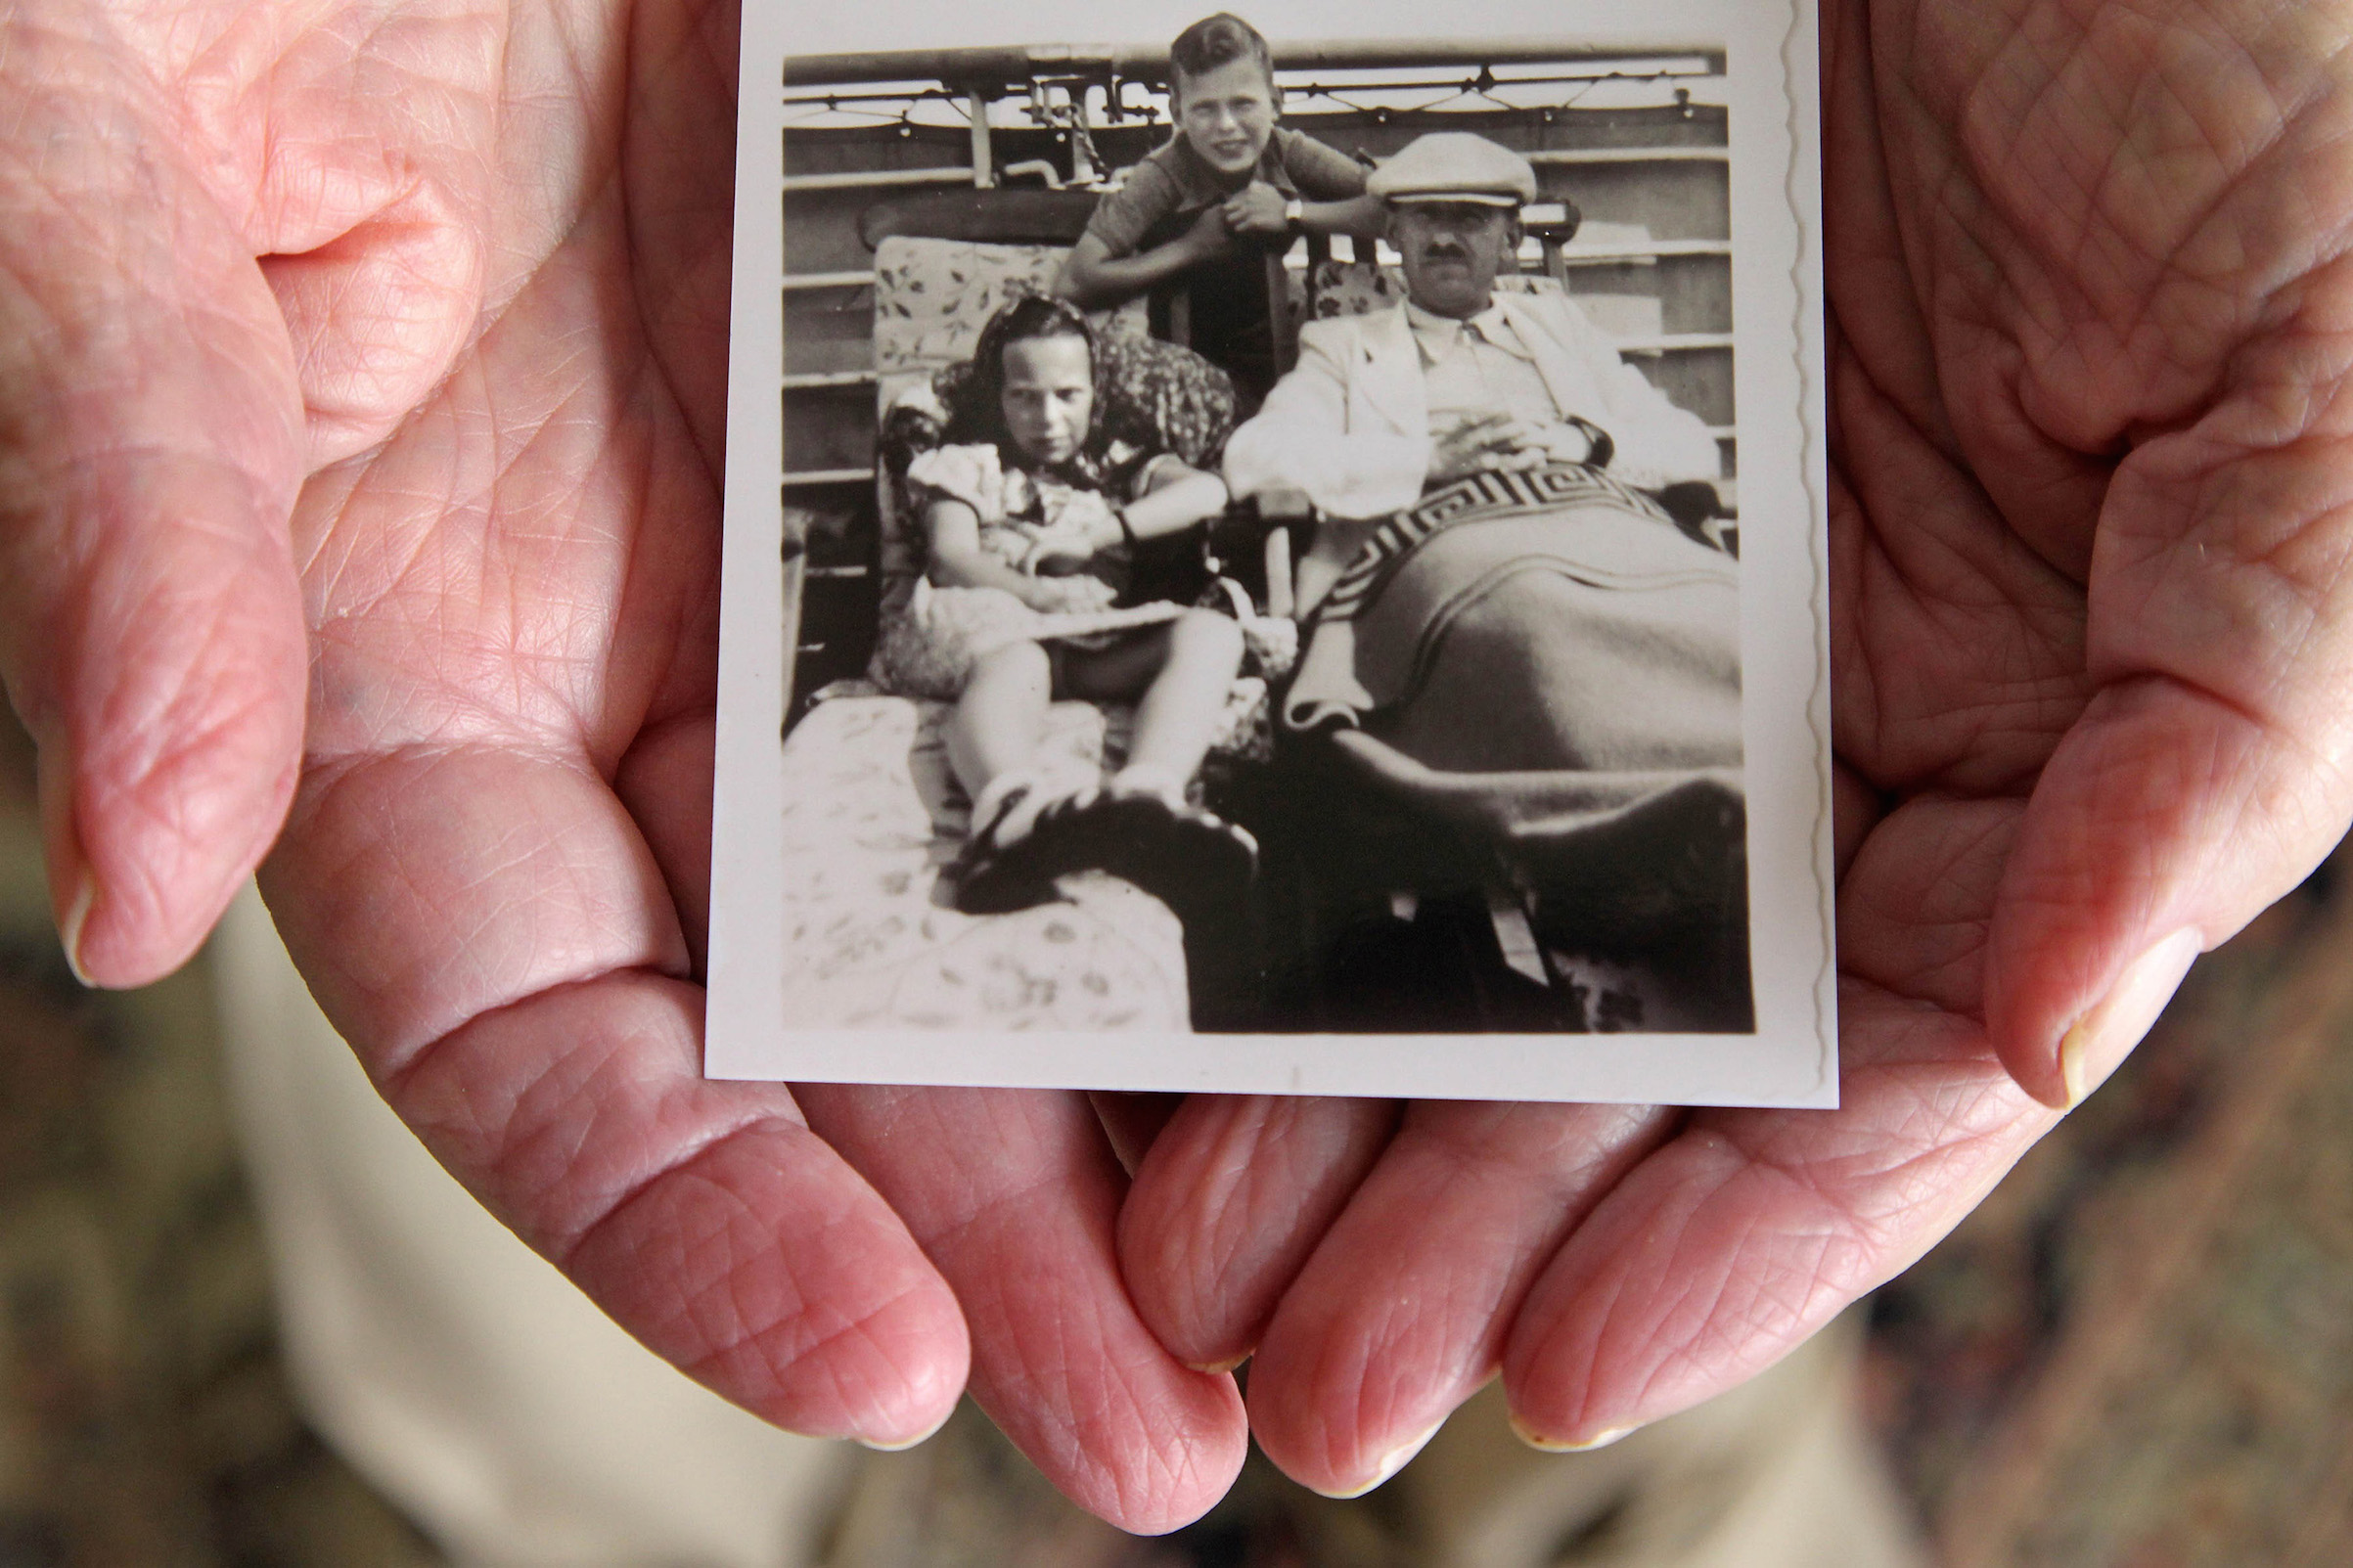 Herbert Karliner, one of the survivors of the 900 Jewish refugees fleeing Hitler who were aboard the ocean liner, St. Louis, in 1939, shares photos and documents from his ordeal on Nov. 18, 2015, in Aventura, Fla. (Carl Juste—TNS via Getty Images)